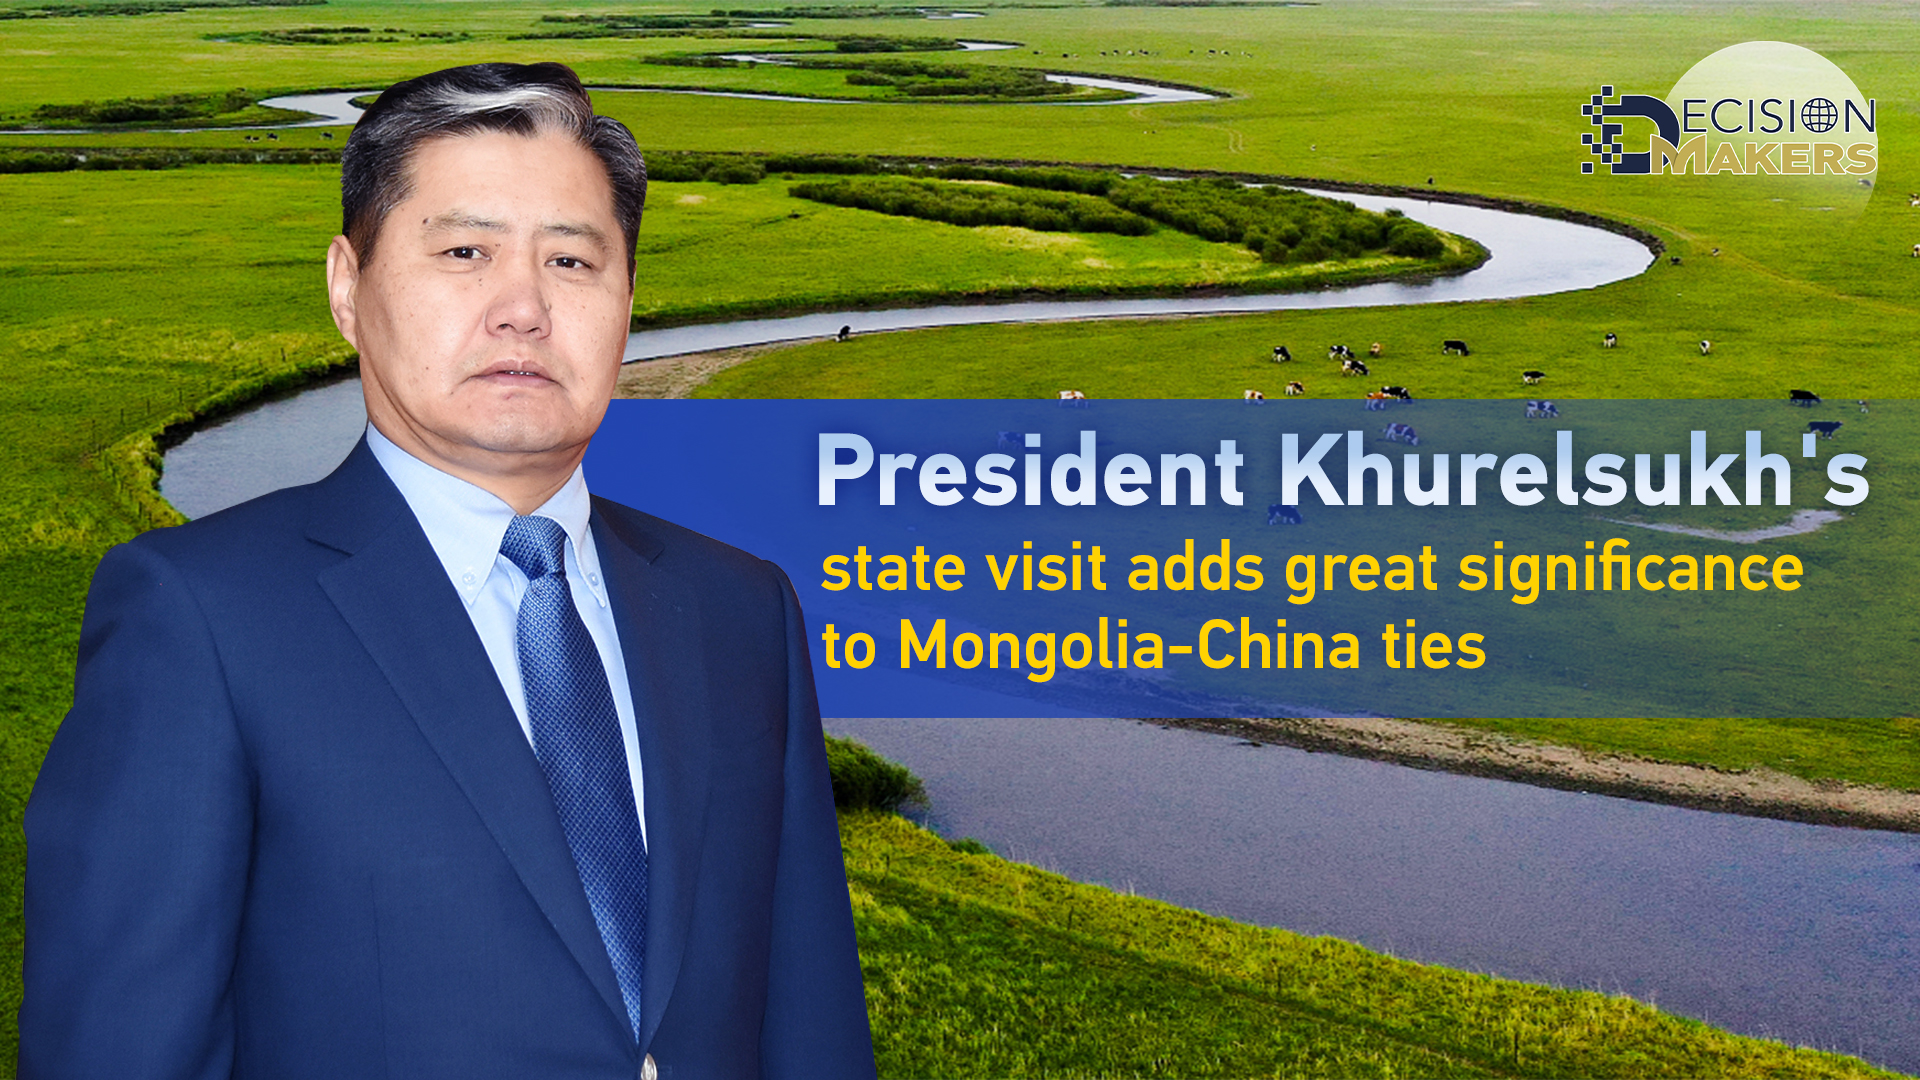 President Khurelsukh's state visit adds great significance to Mongolia-China ties